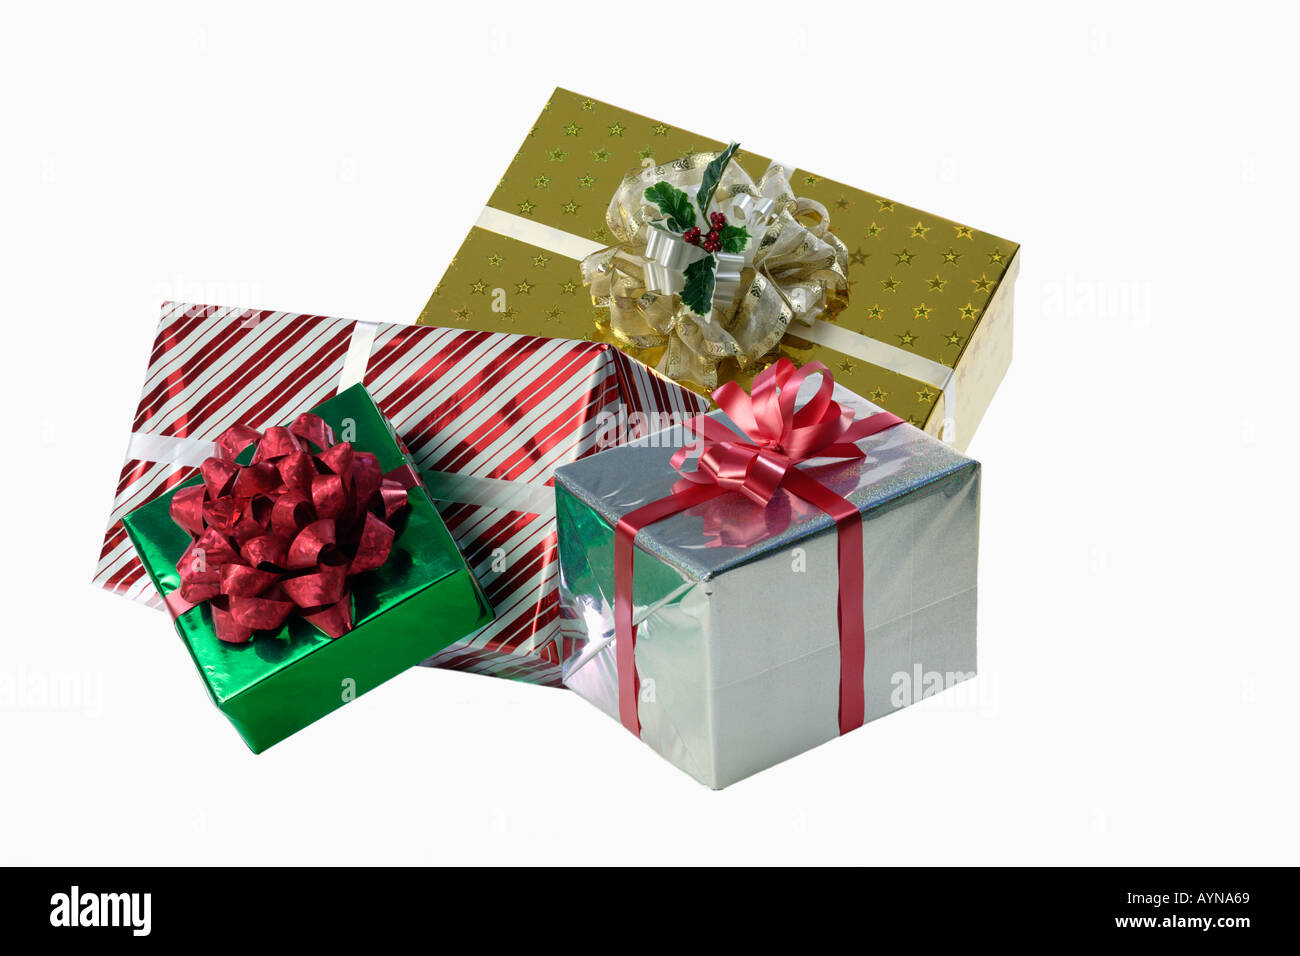 Still life of gift wrapped presents with an ornate bow isolated on a white background Stock Photo